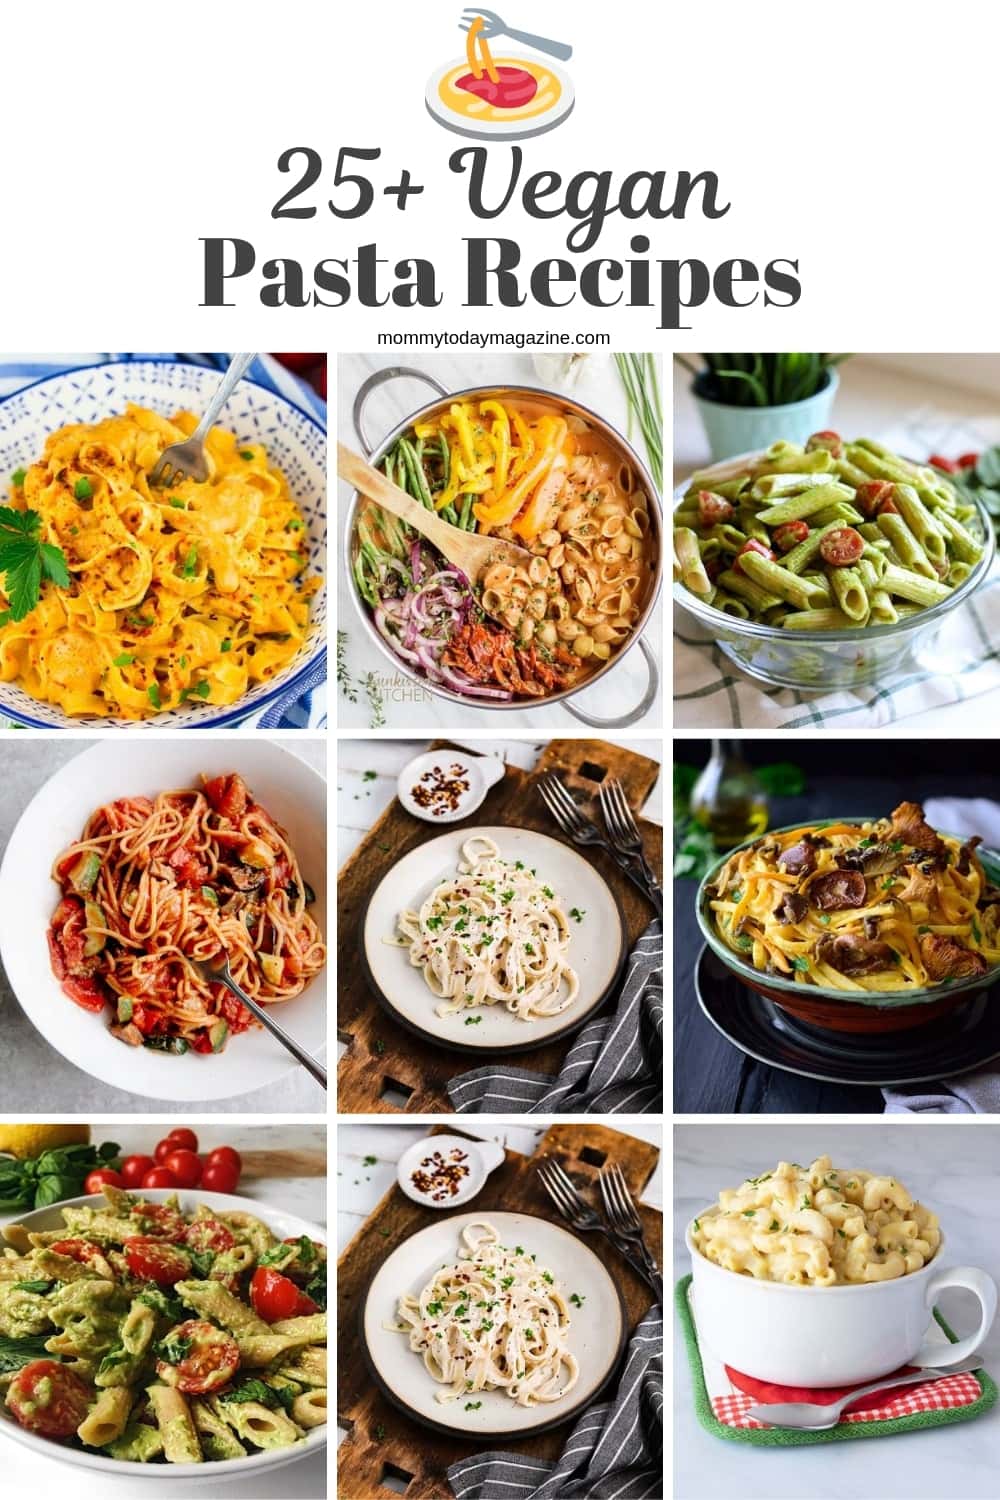 Top 25 Best Vegan Pasta Recipes - Meat and Dairy Free Pasta Recipes